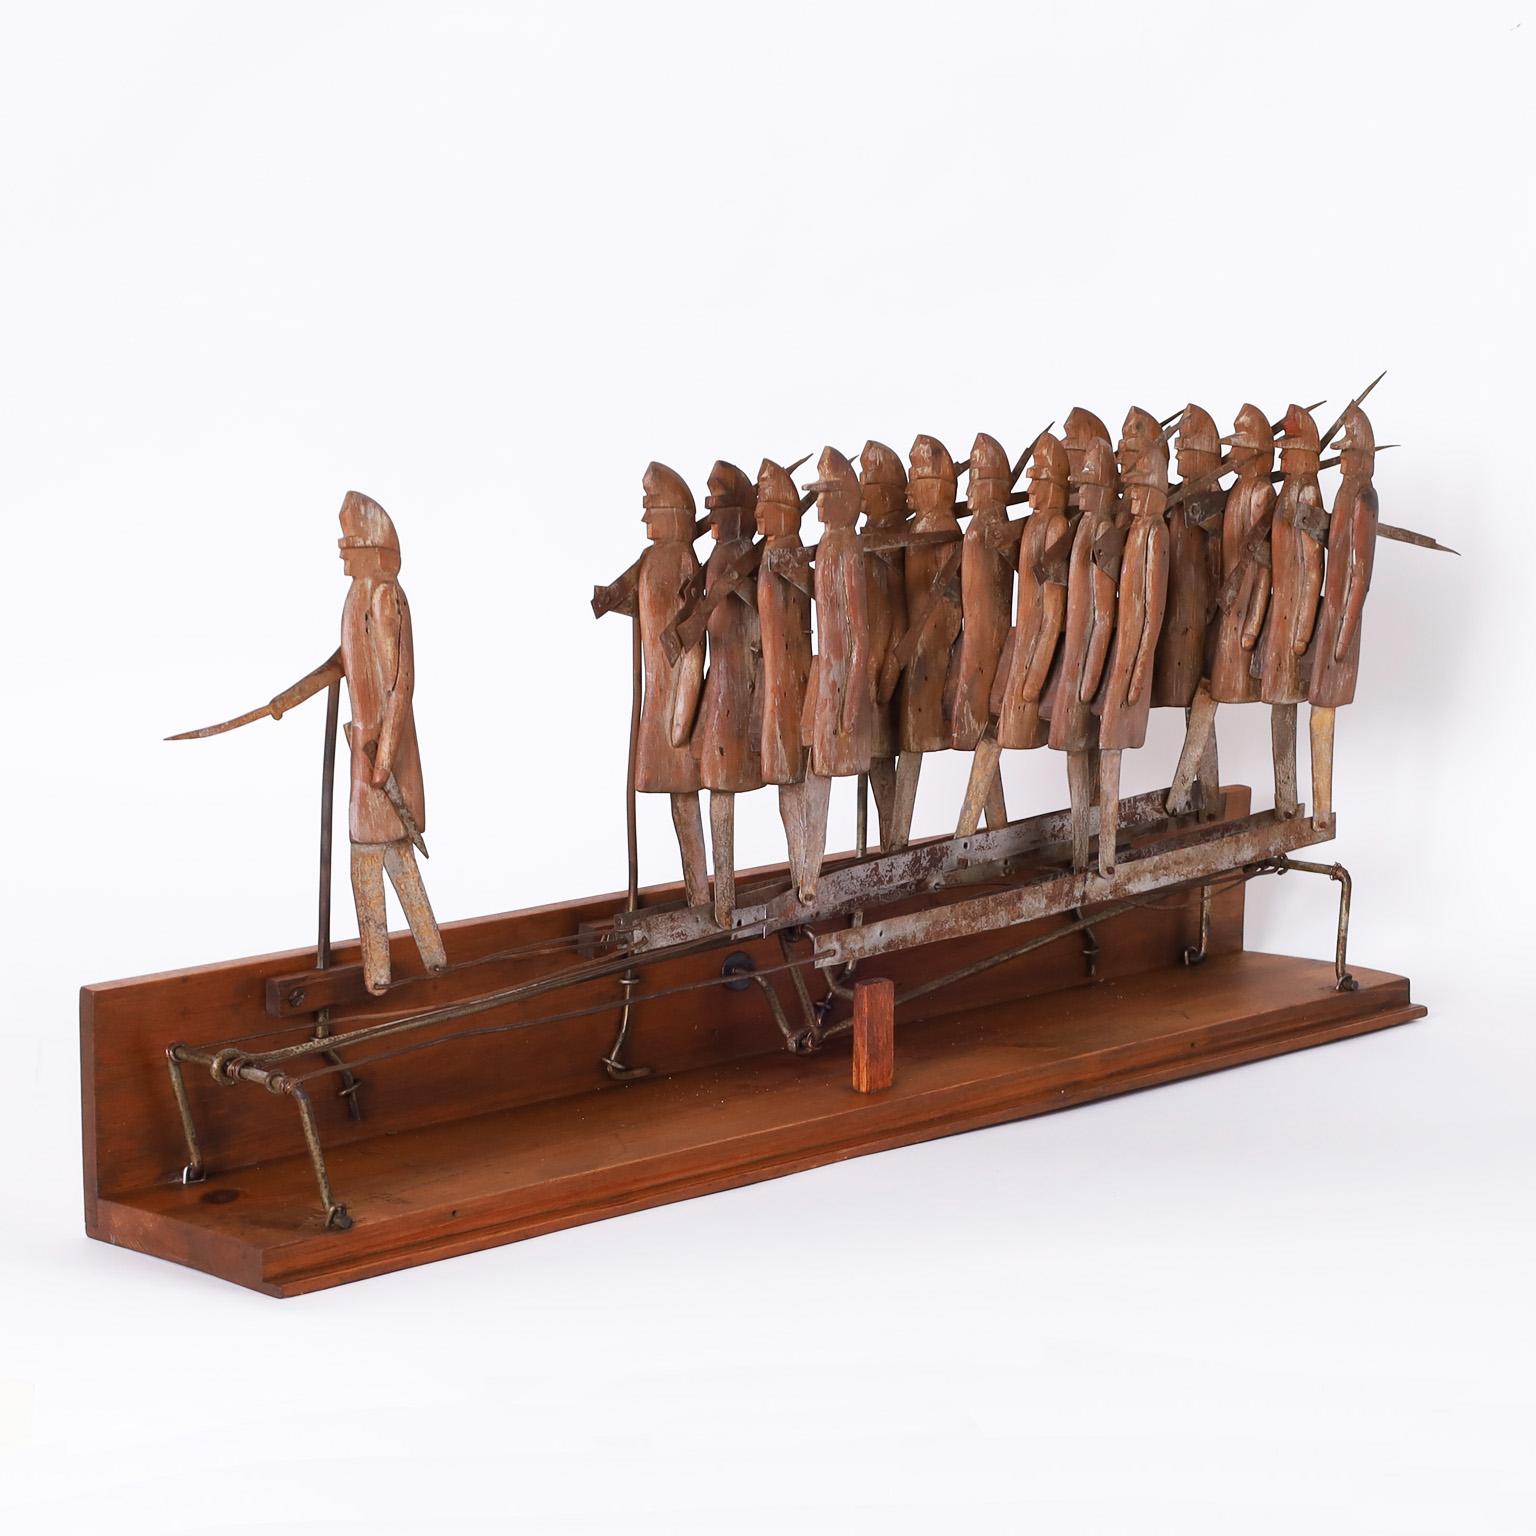 Antique mechanical toy ambitiously crafted with a metal mechanism moved by a crank in the back, sending civil war union soldiers, carved in pine with their distinctive caps, marching to battle.